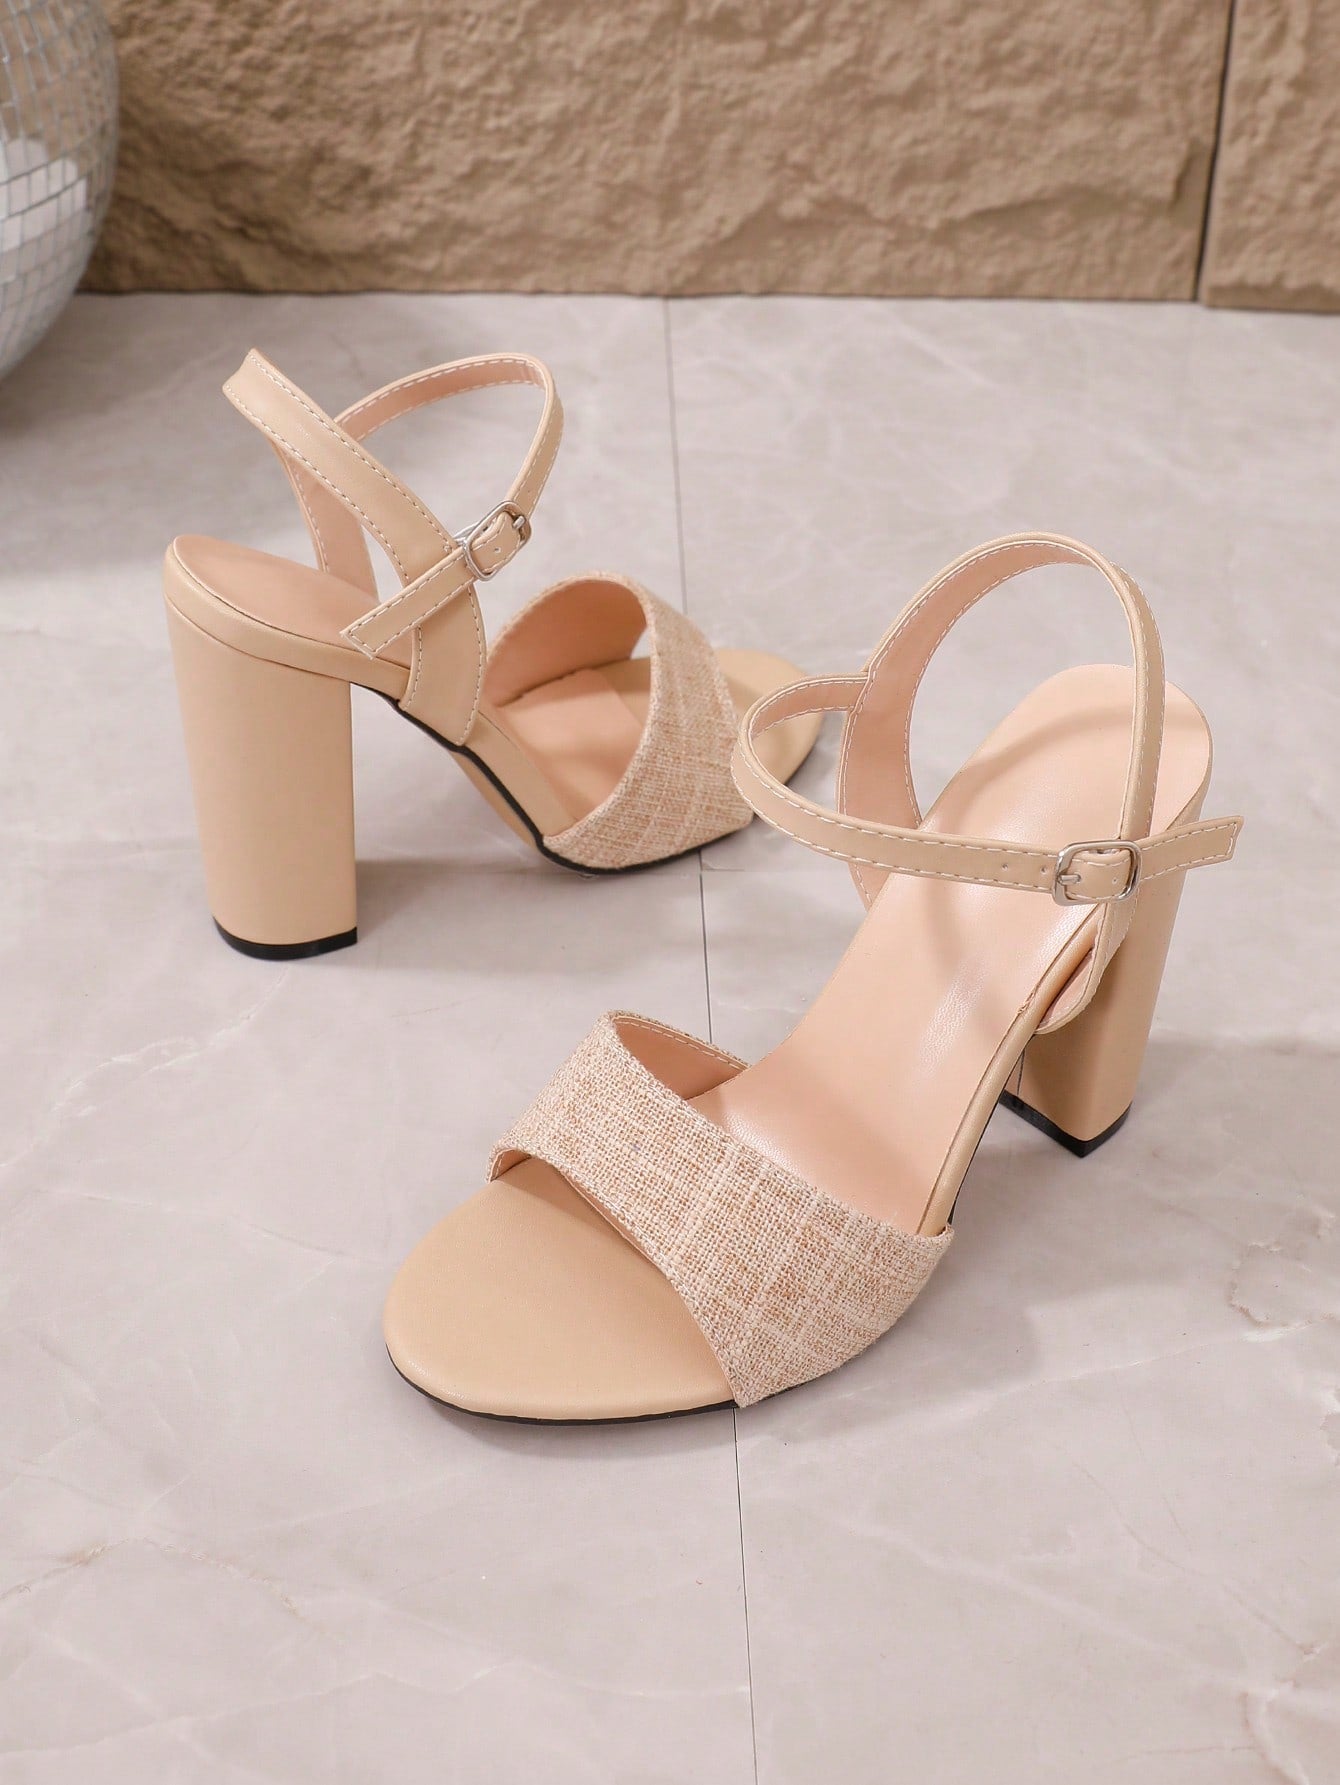 Women's Summer Elegant Peep Toe Hollow Out Buckled Strap Chunky Heel Apricot Sandals-Apricot-5